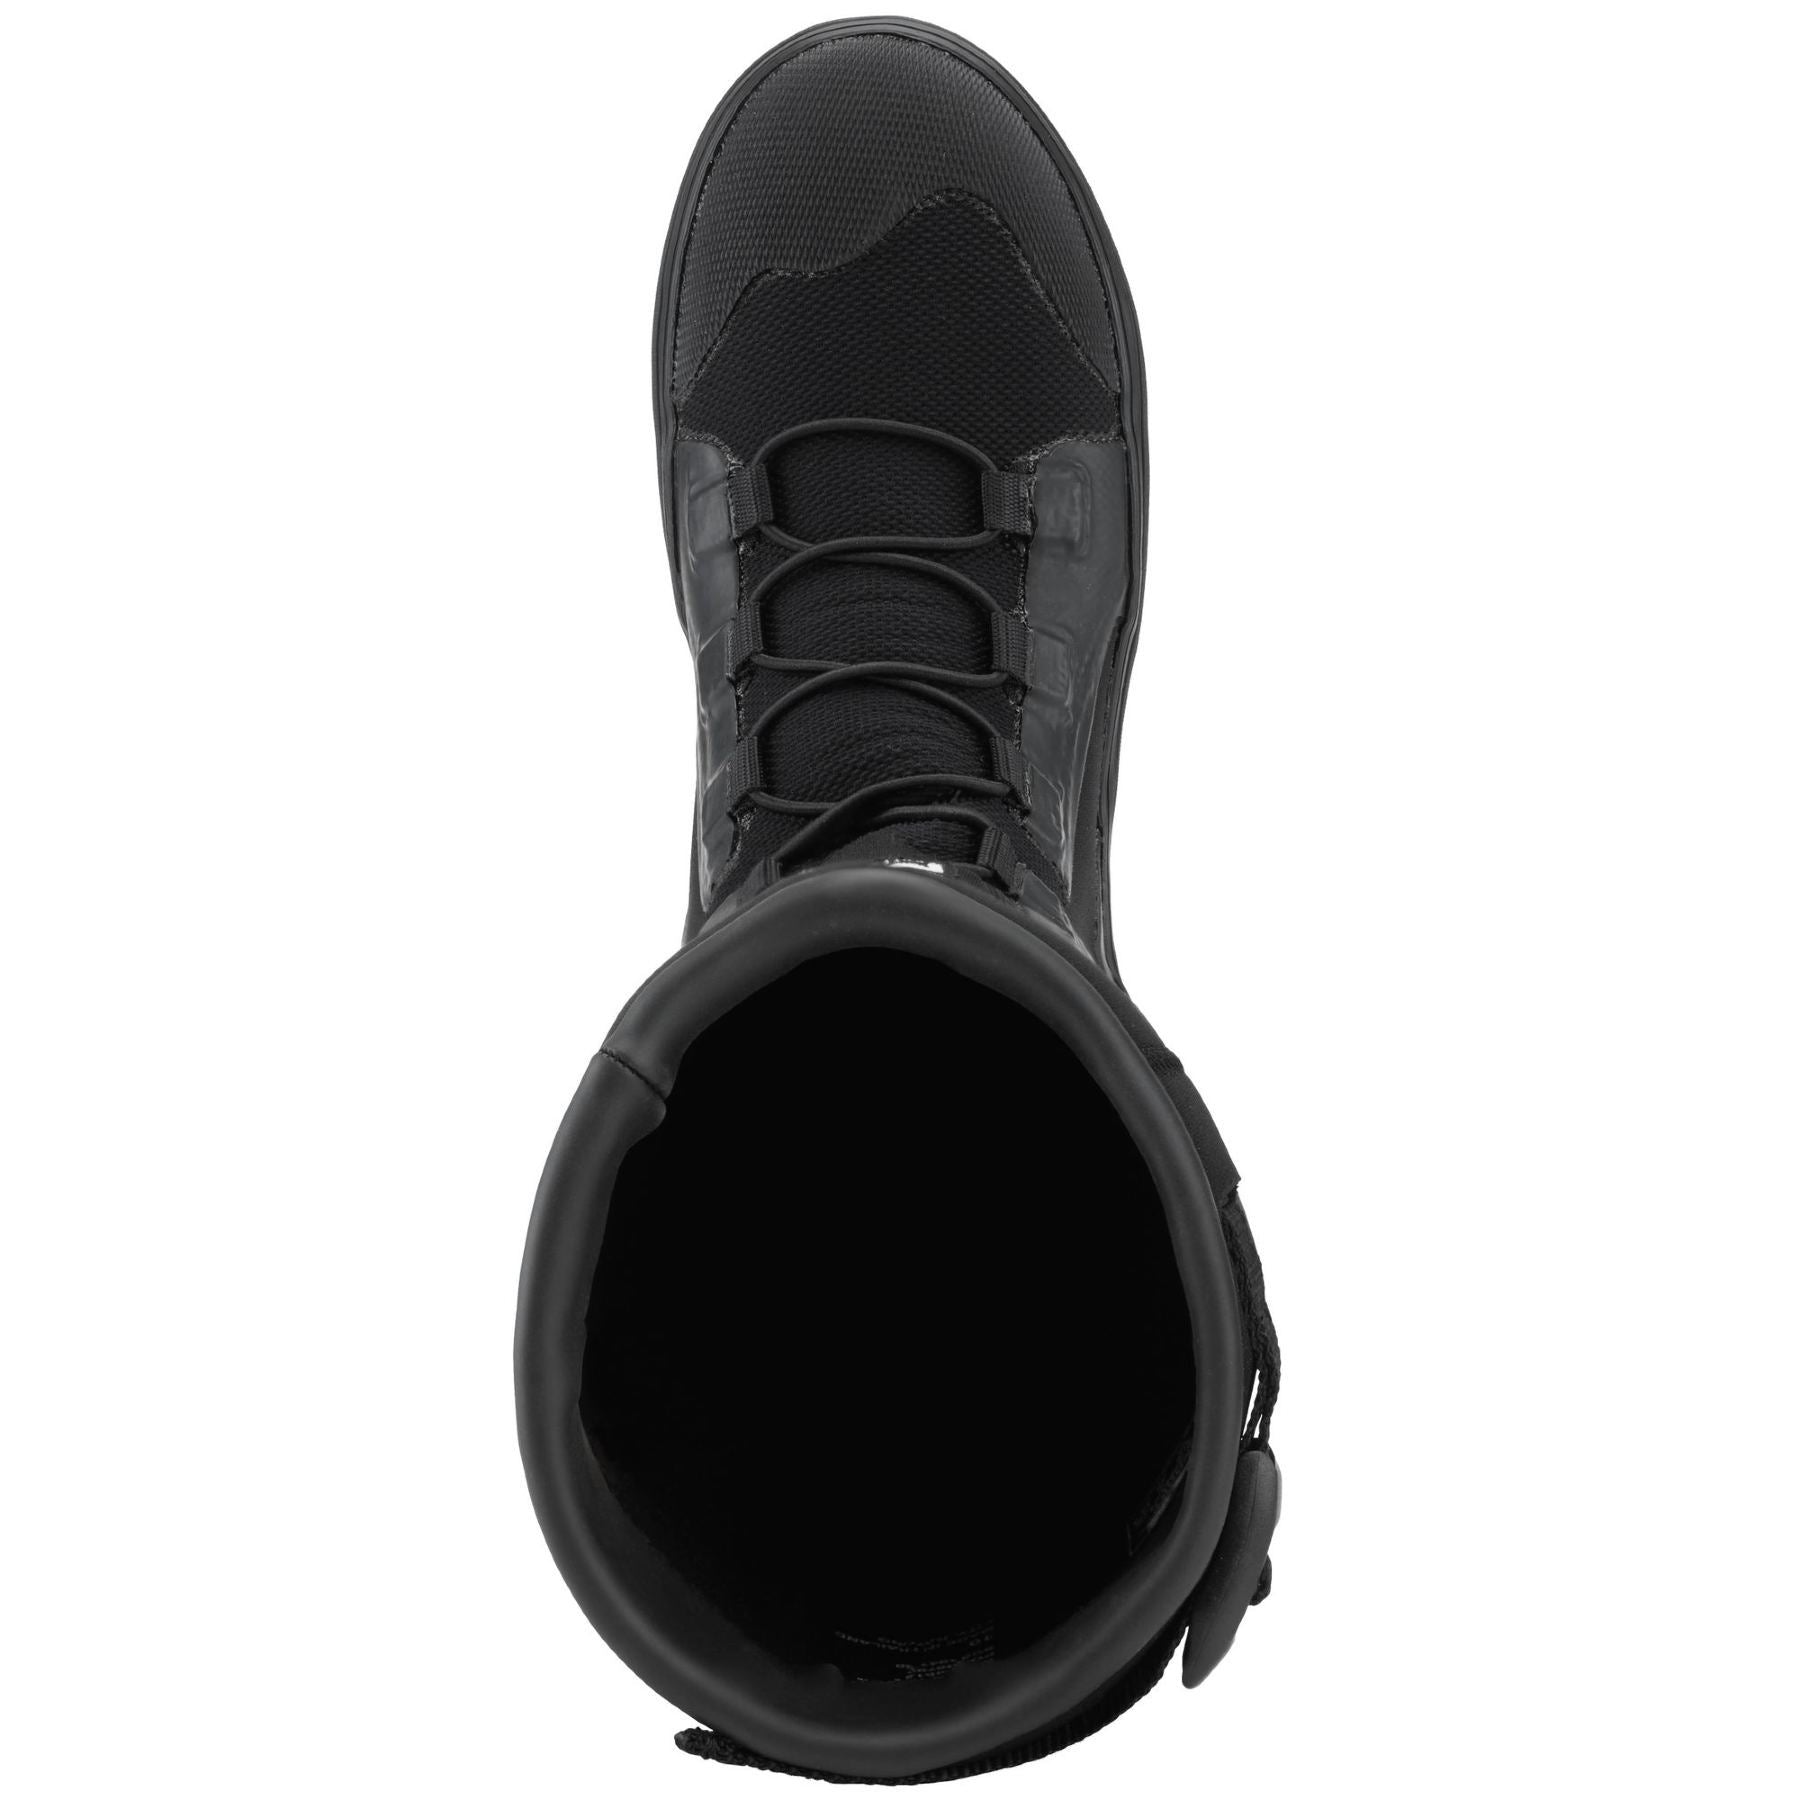 NRS Boundary Paddle Boot